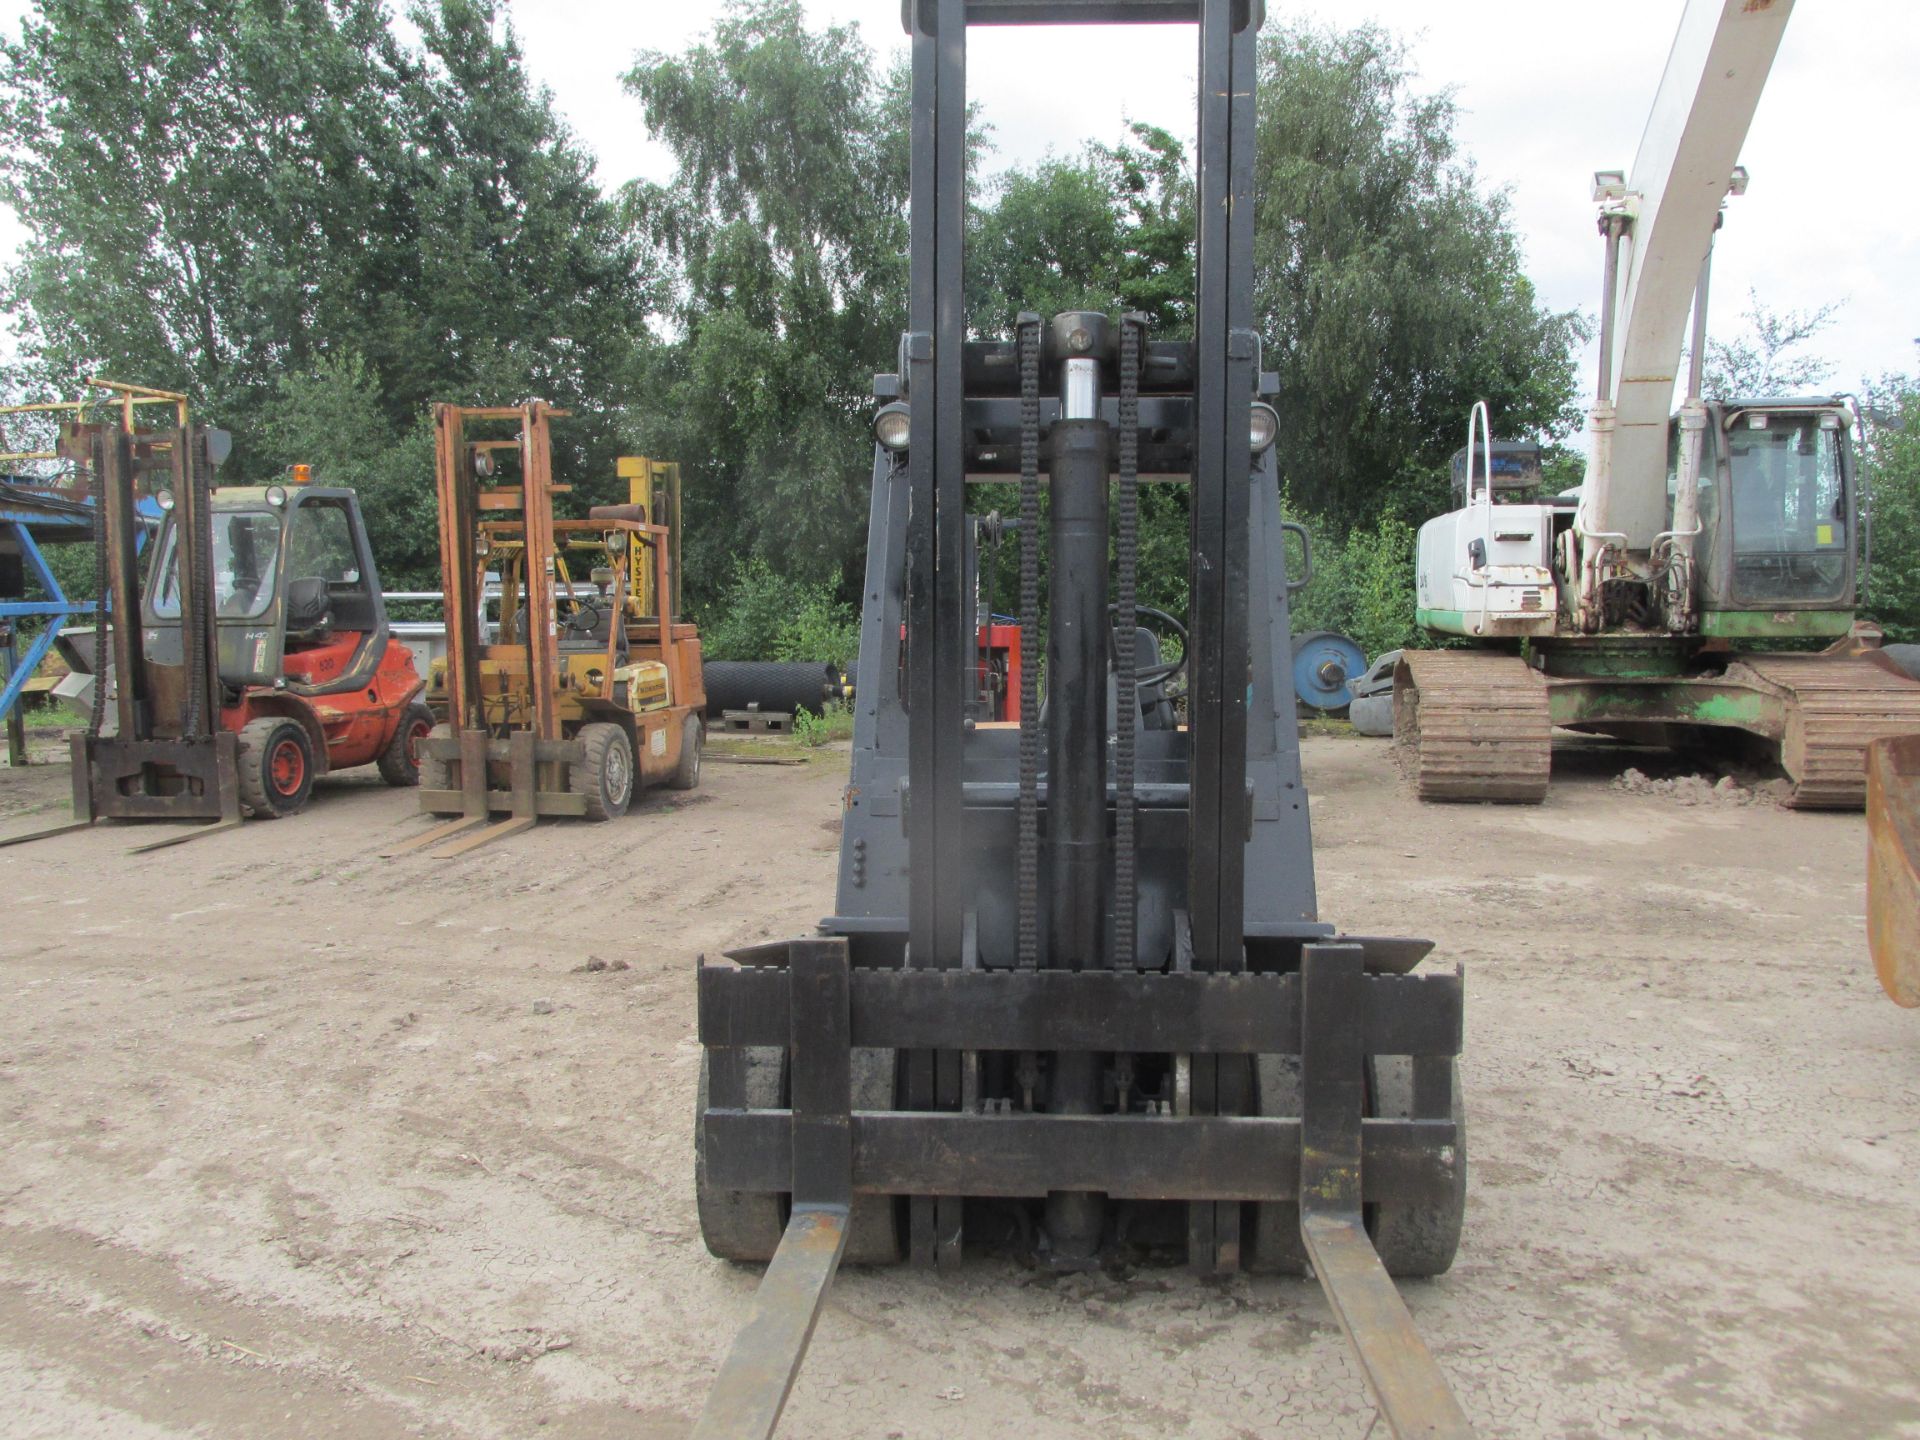 * Fiat DL40-C, 4 Tonne Diesel Forklift, Free Lift Mast, Max Lift Height 5 Metres, Solid Tyres, - Image 3 of 3